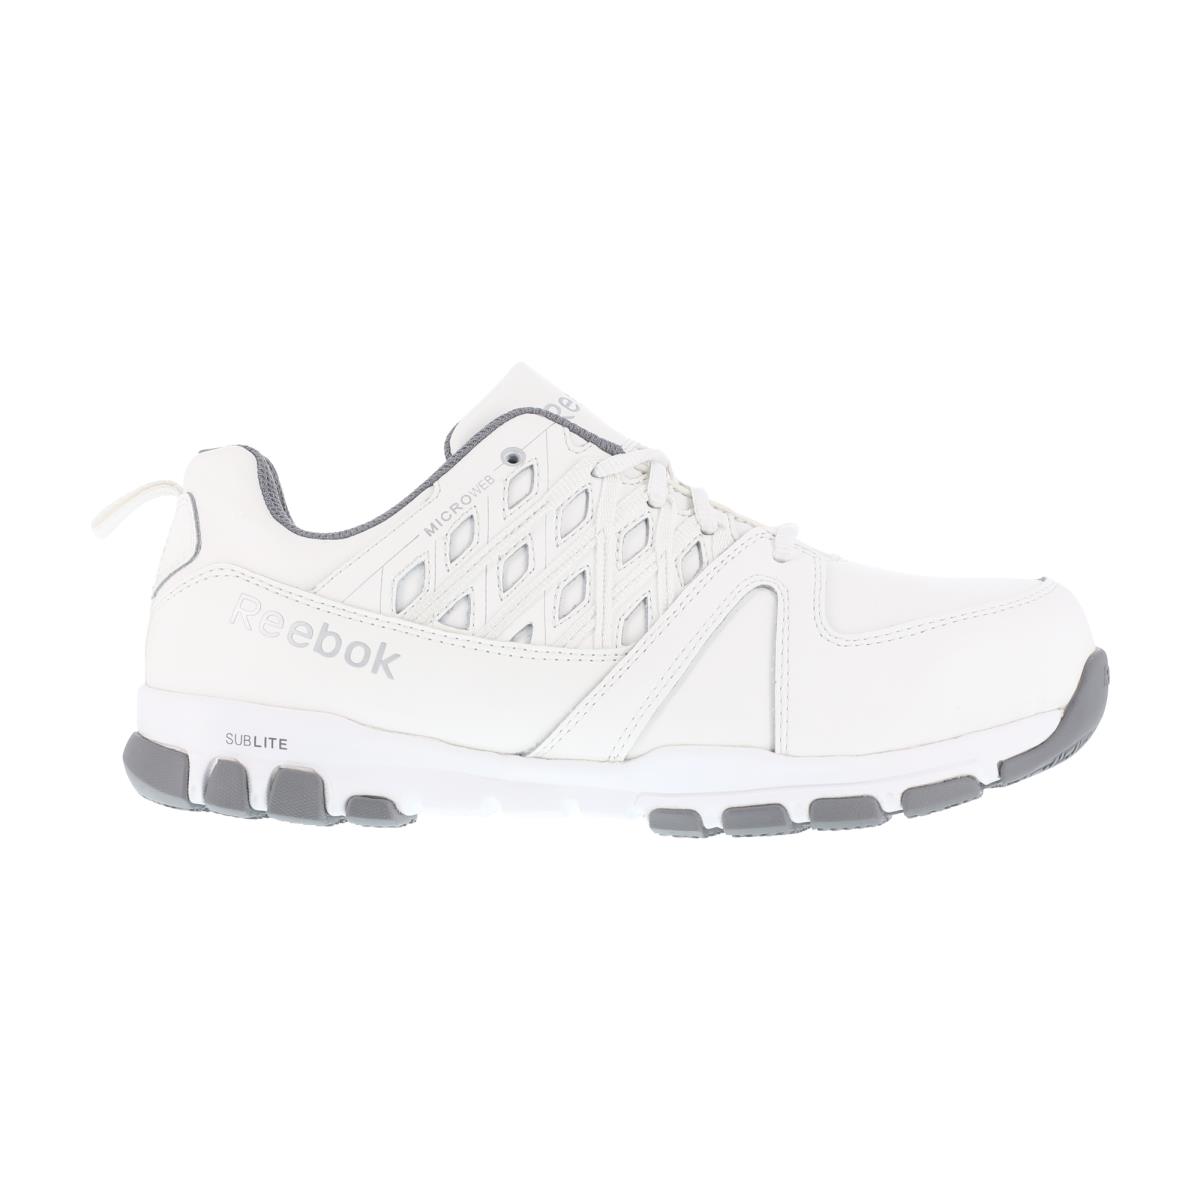 Reebok Mens White Leather Work Shoes ST Sublite Athletic M